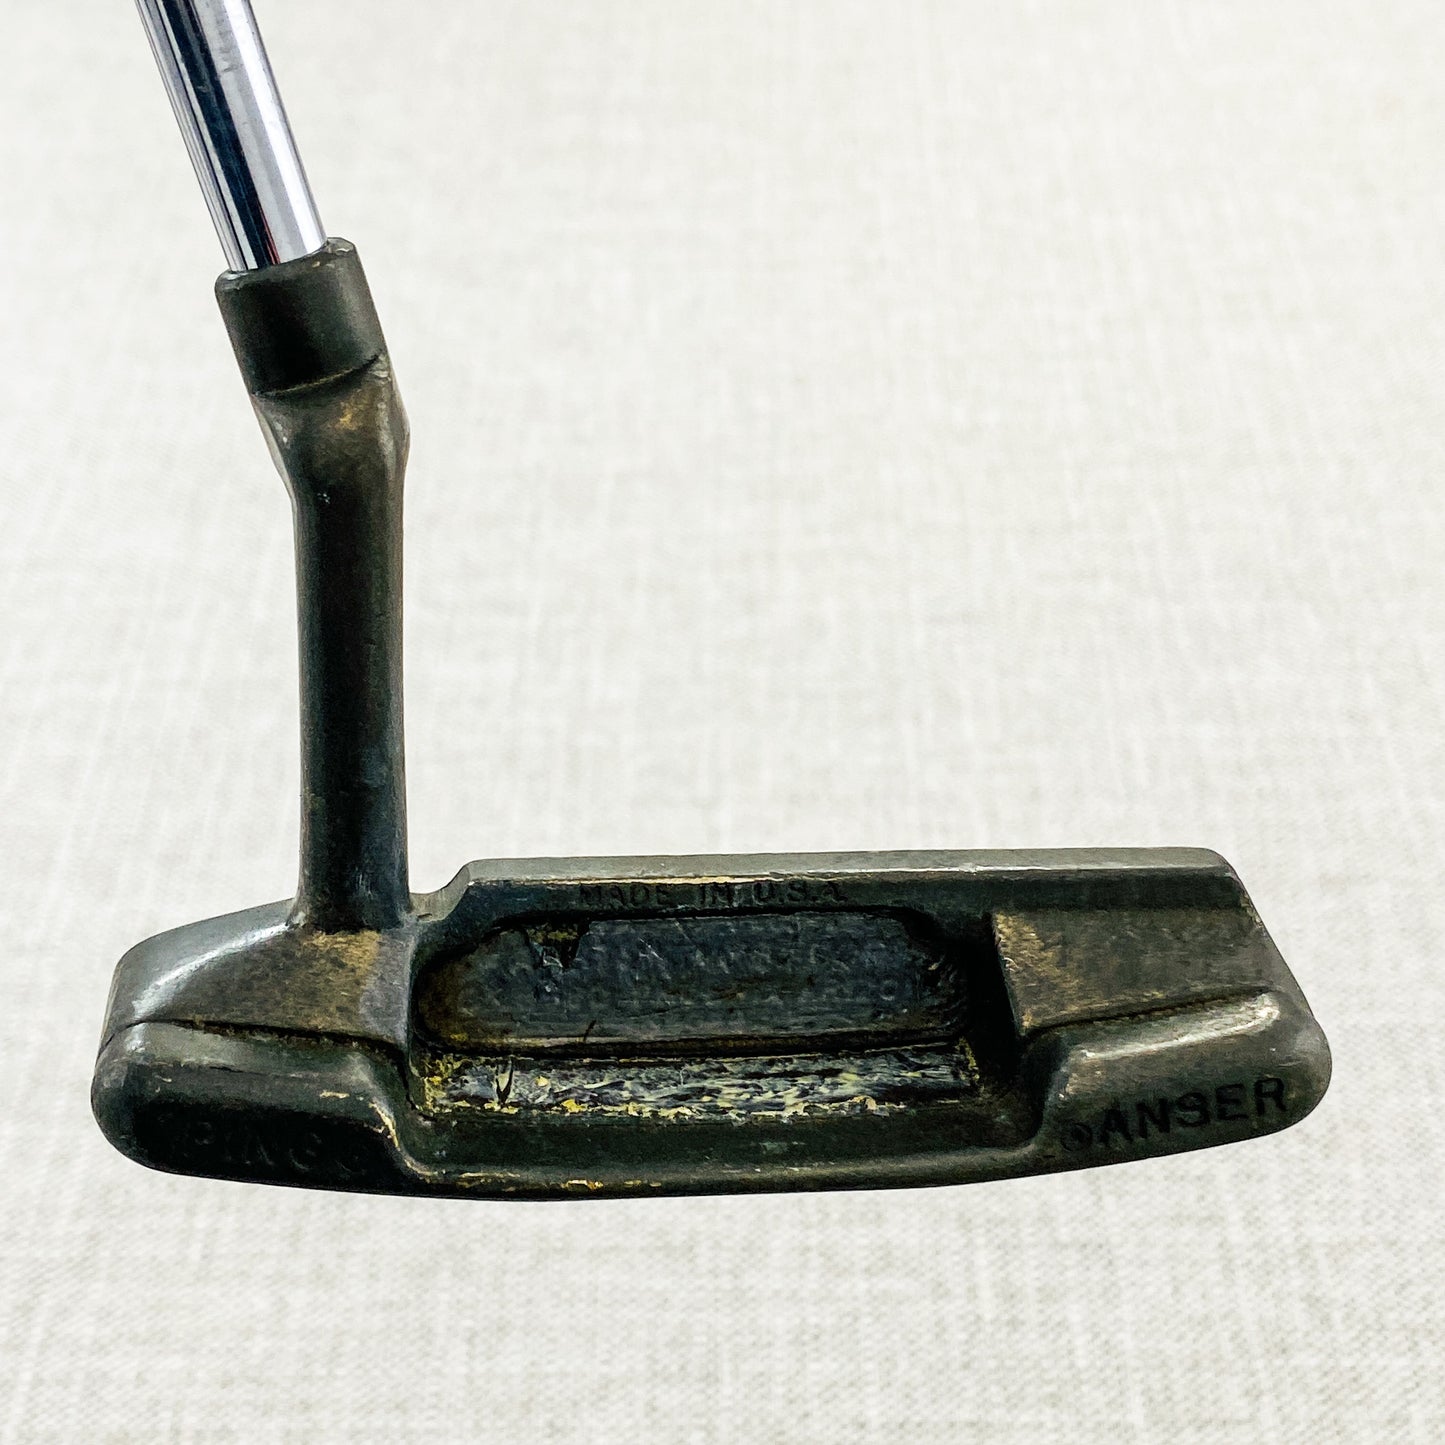 PING Anser Manganese Bronze Putter. 35 inch - Good Condition # T792